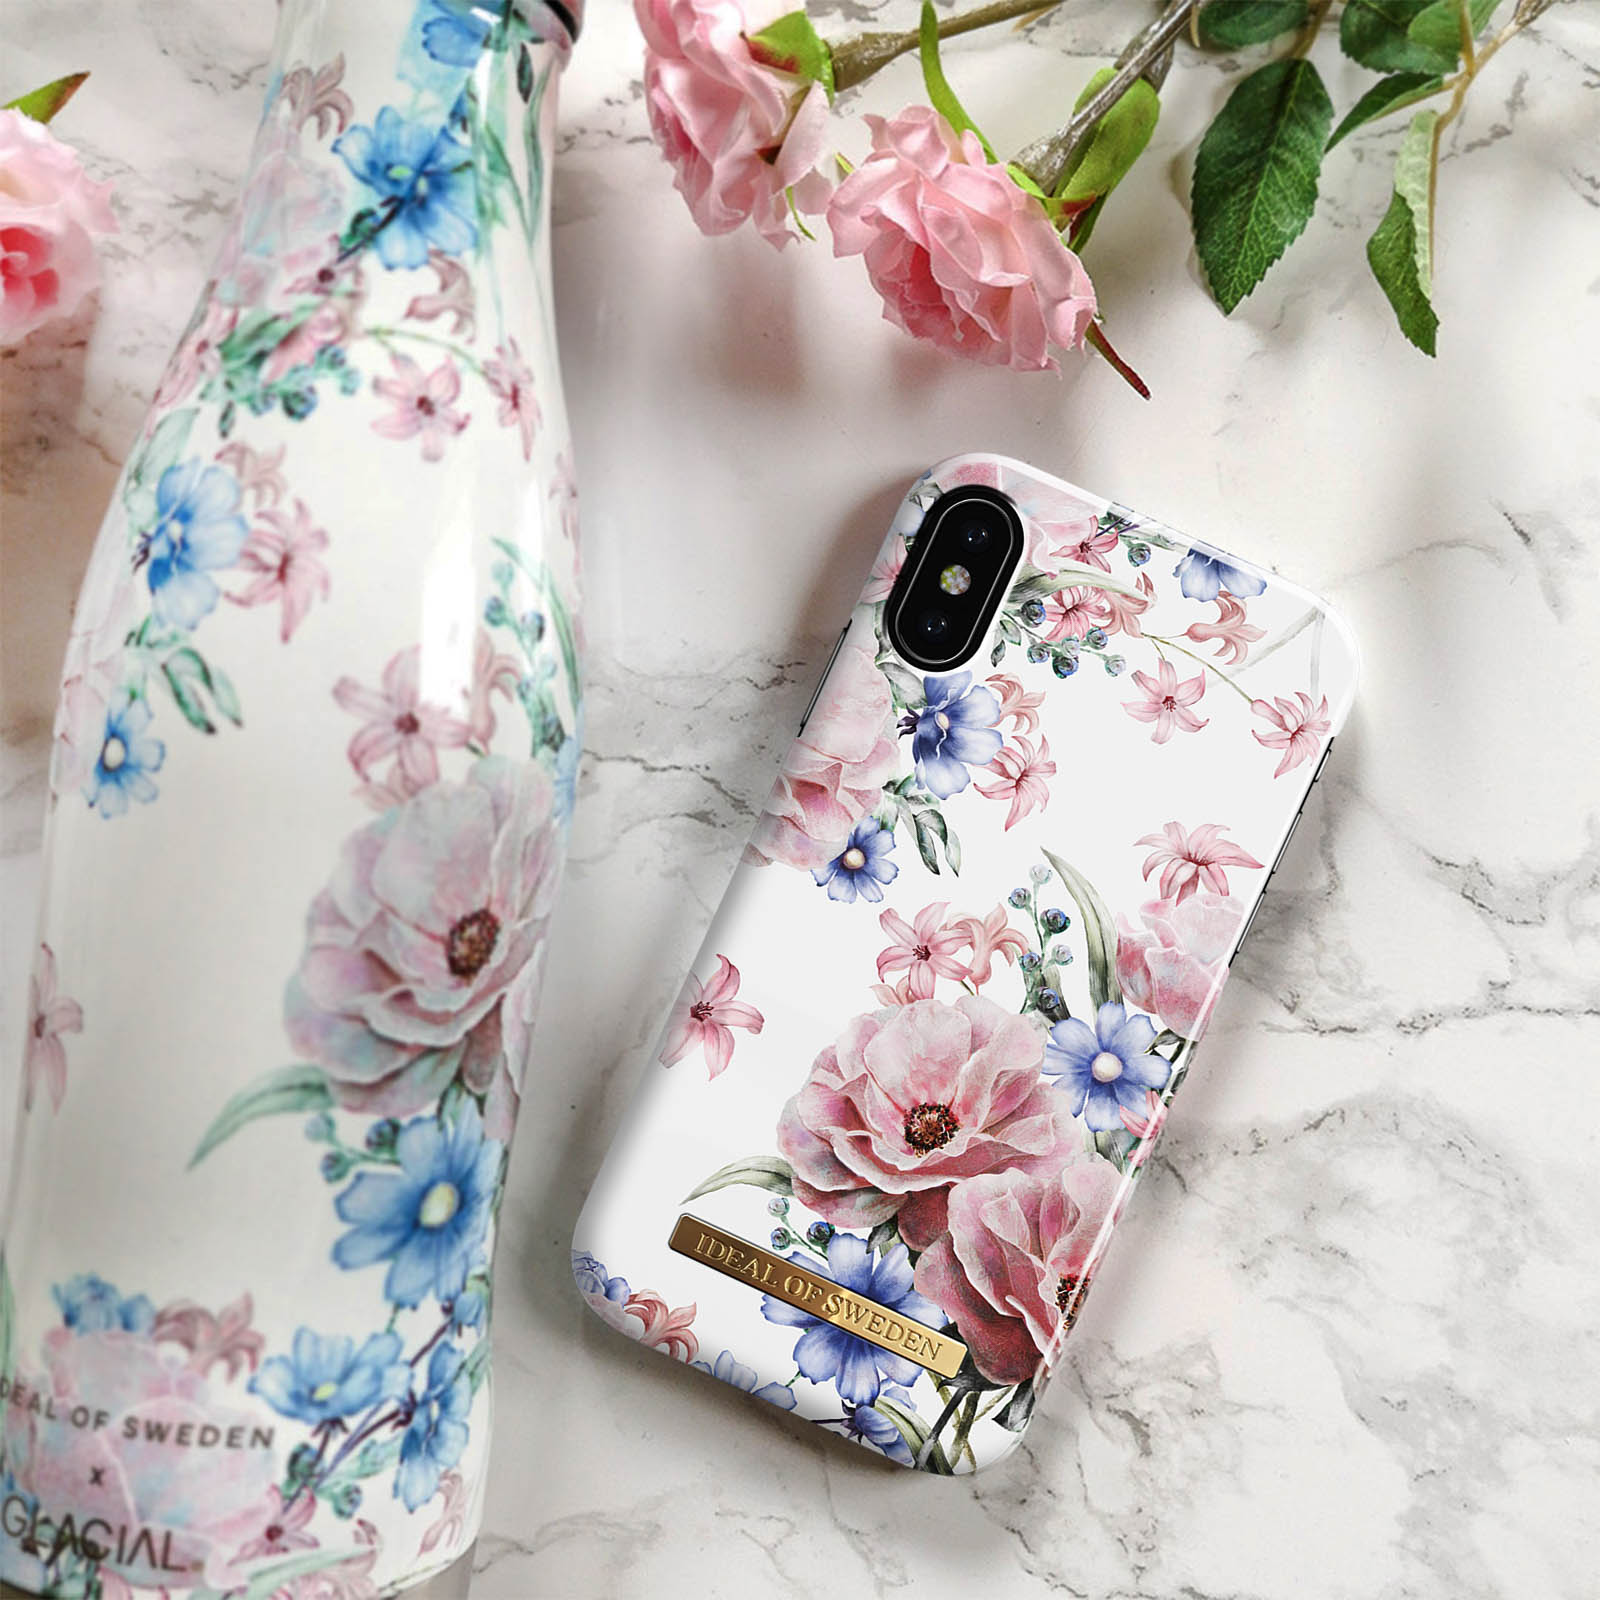 XS, Floral SWEDEN Series, Backcover, IDEAL iPhone Apple, OF Rosa Romance